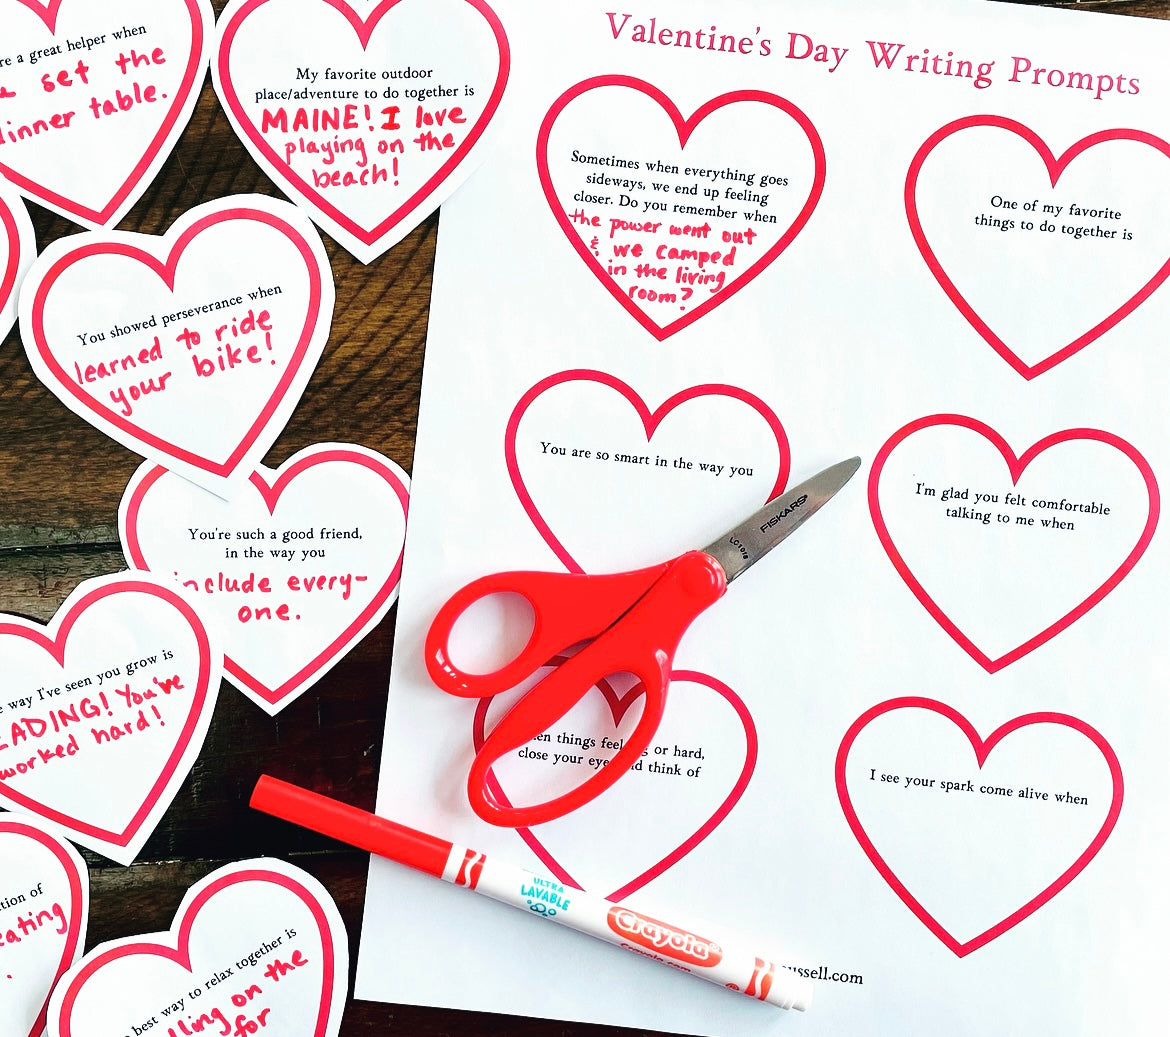 CONNECT This Valentine's Day! Writing Prompts To Make It Easy!